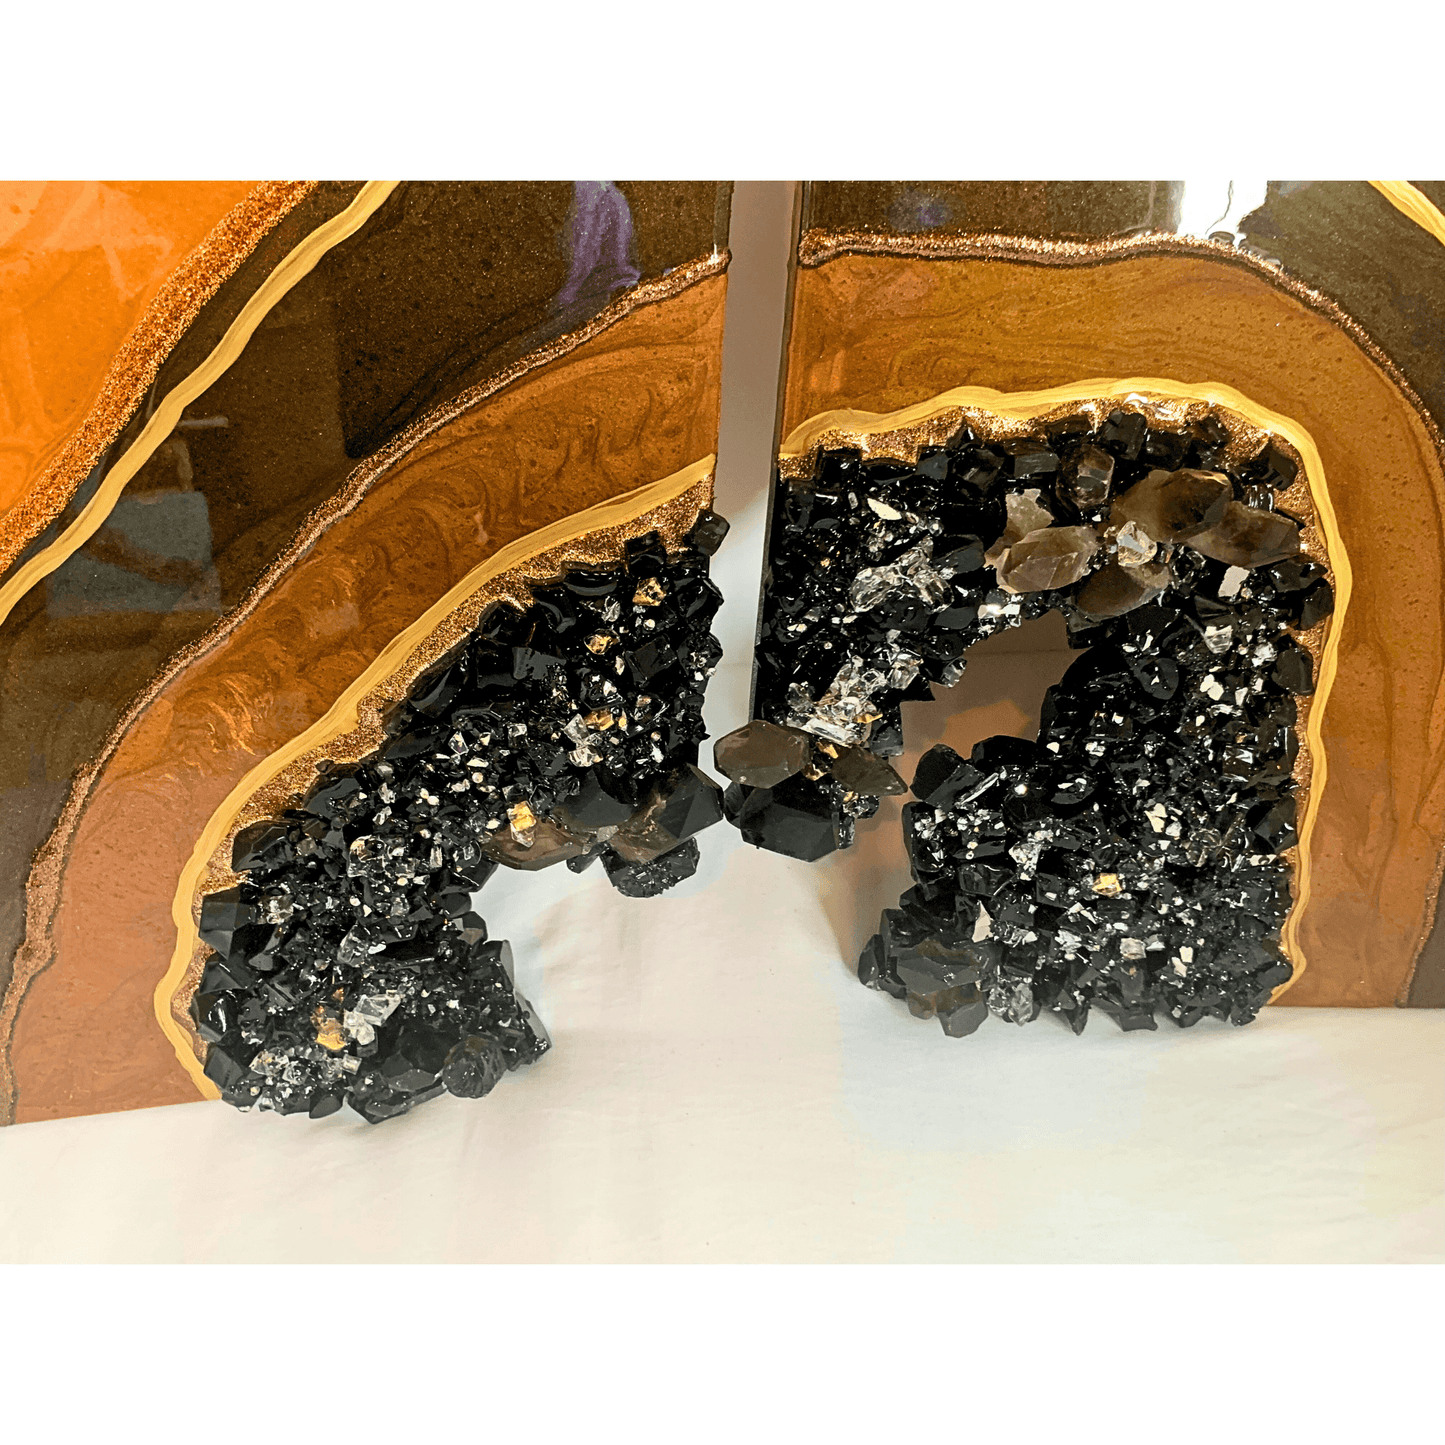 "PROTECTED" Black Obsidian & Smoky Quartz with Bronze and Gold Accents Resin Art Geode